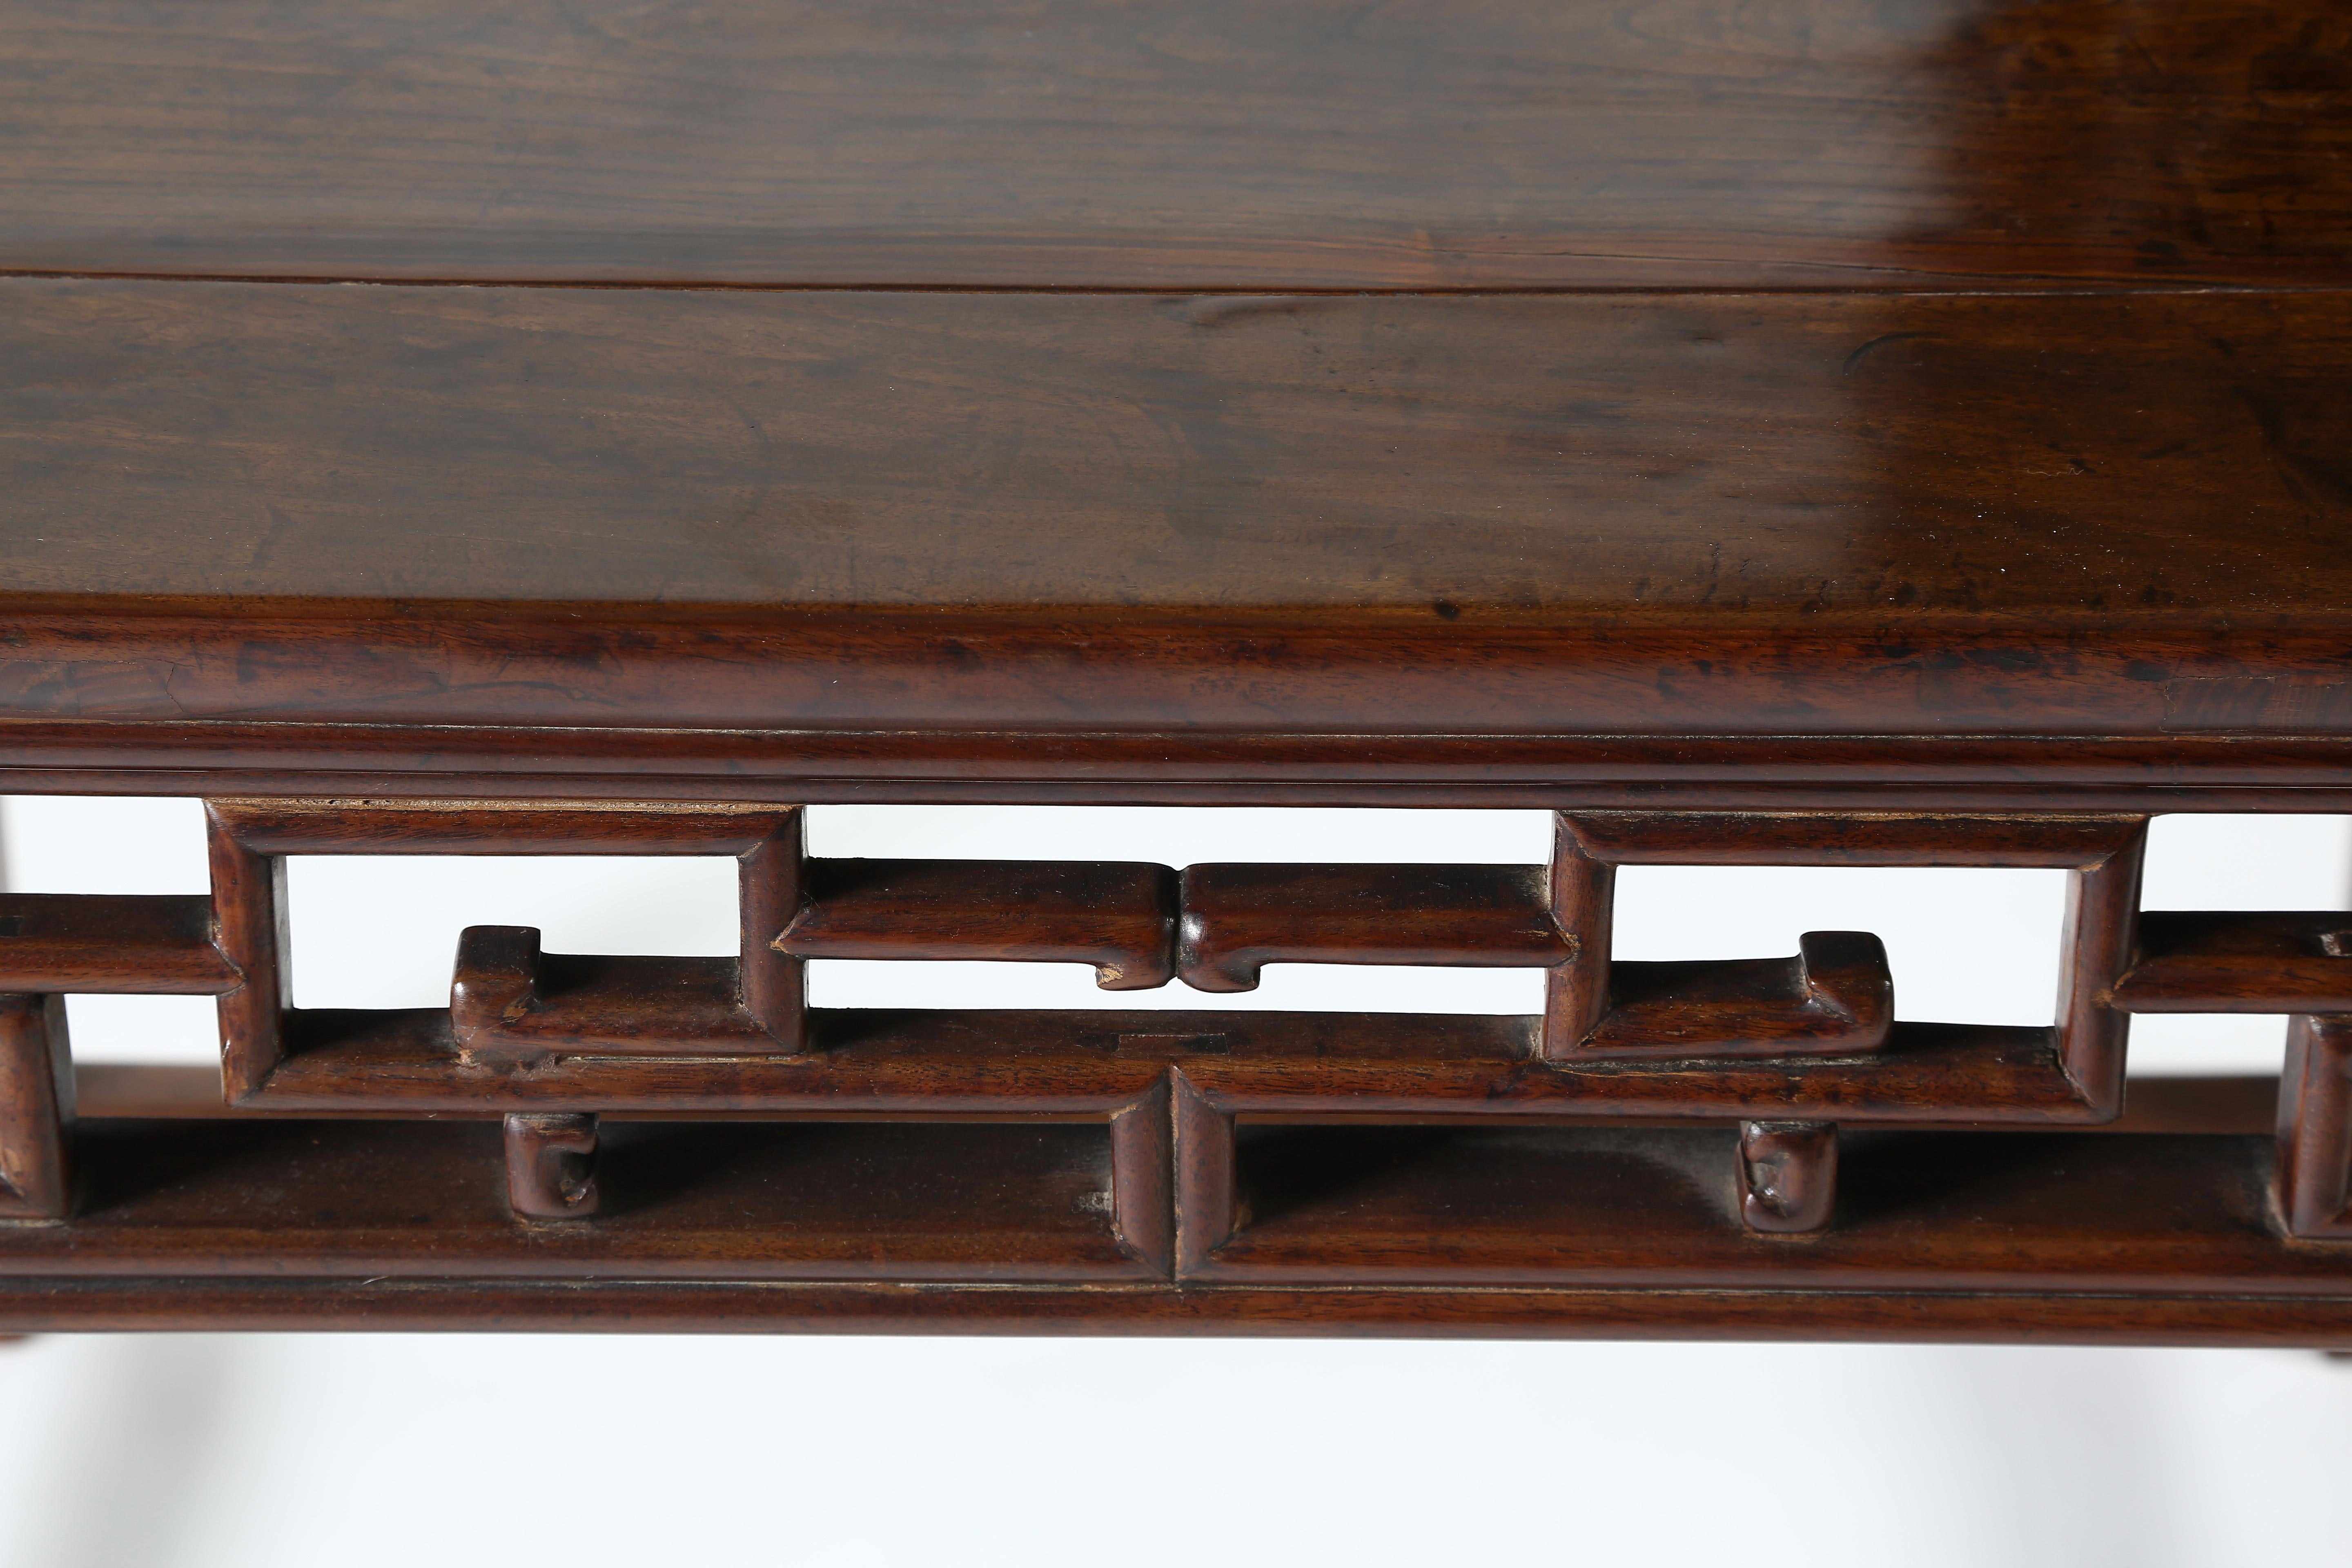 Chinese Antique Chinoiserie Walnut Square Display Table with Fretwork Aprons, c. 1800’s For Sale